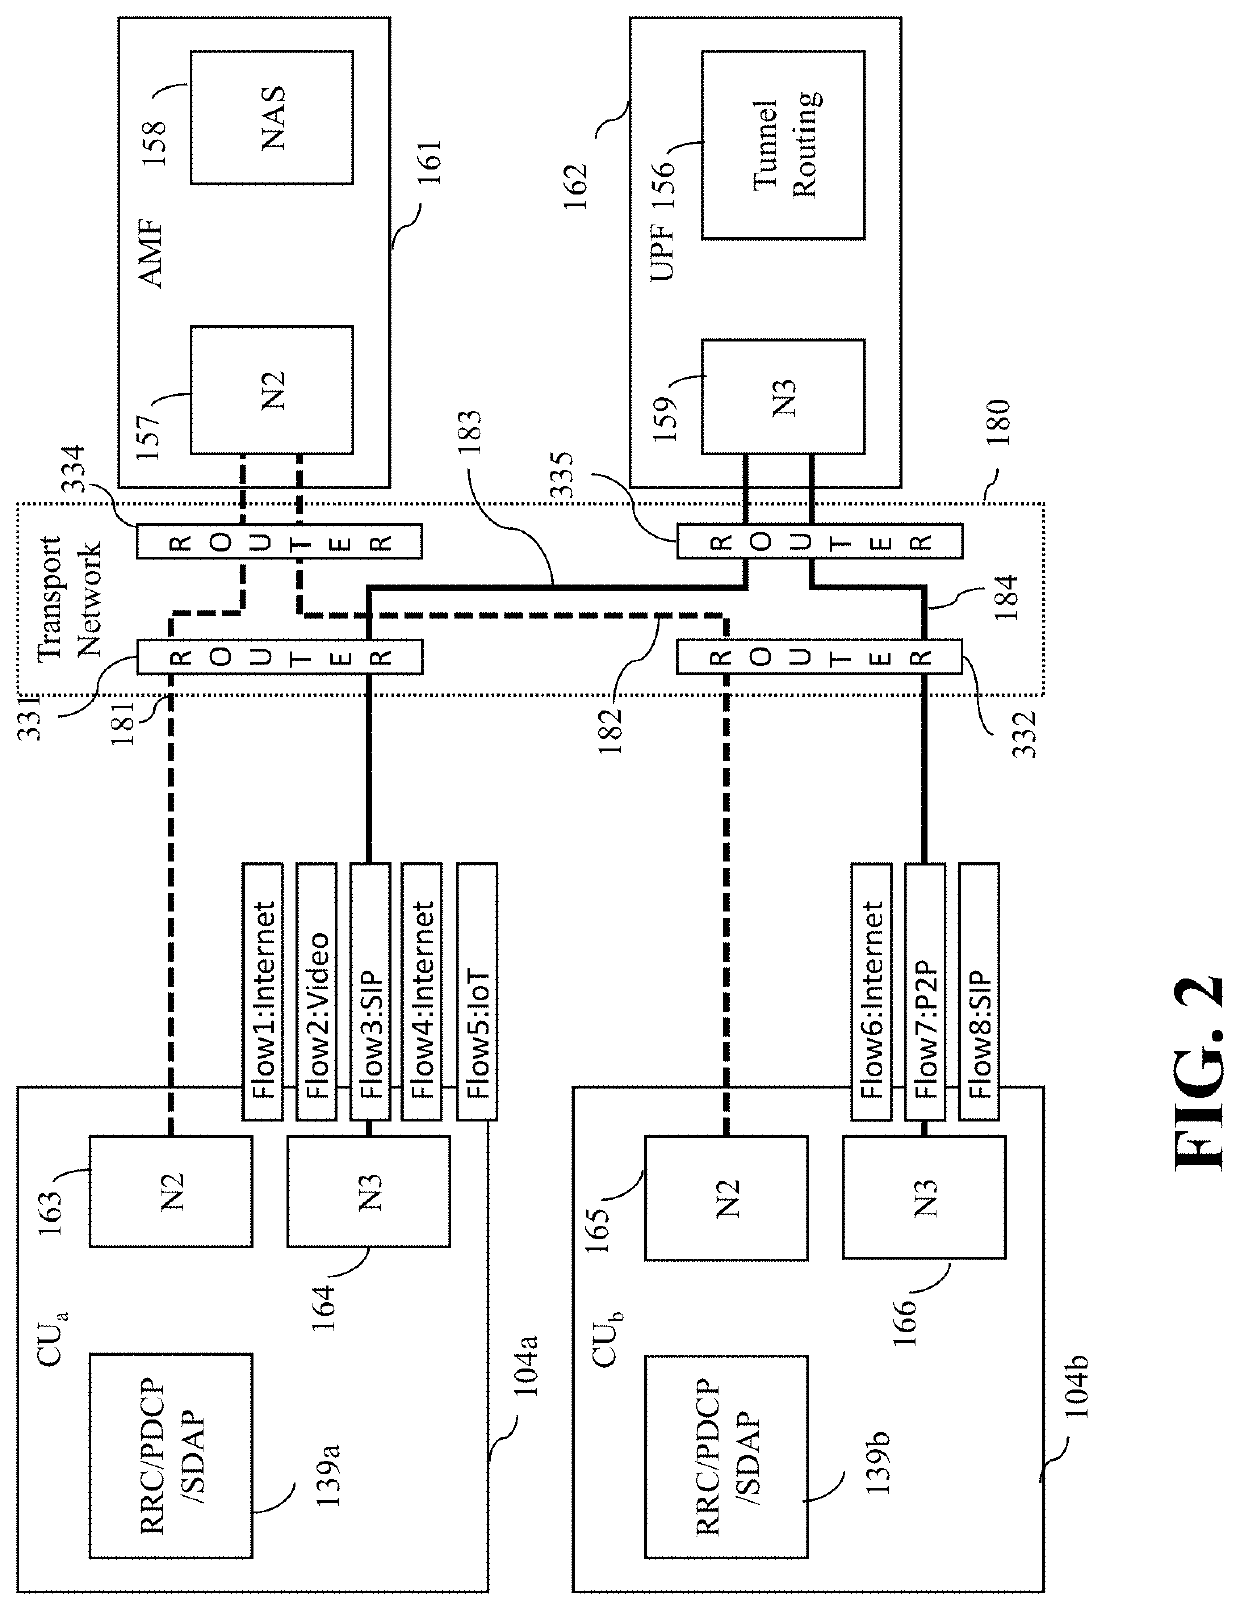 APPARATUS AND METHOD FOR QoS AWARE GTP-U TRANSPORT IN MOBILE NETWORKS